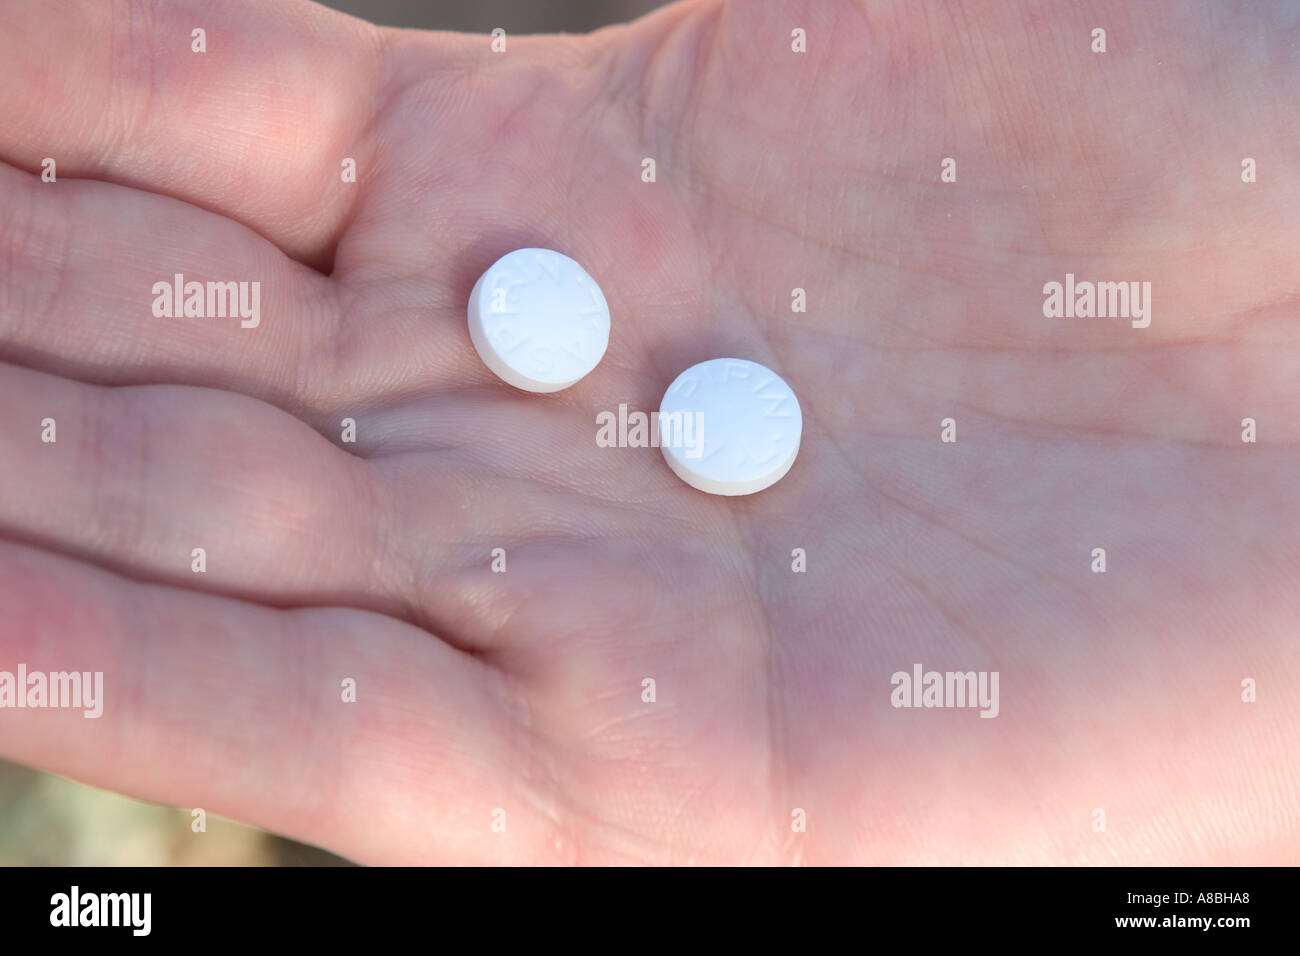 Two aspirin tablets resting in the palm of someone s hand  Stock Photo